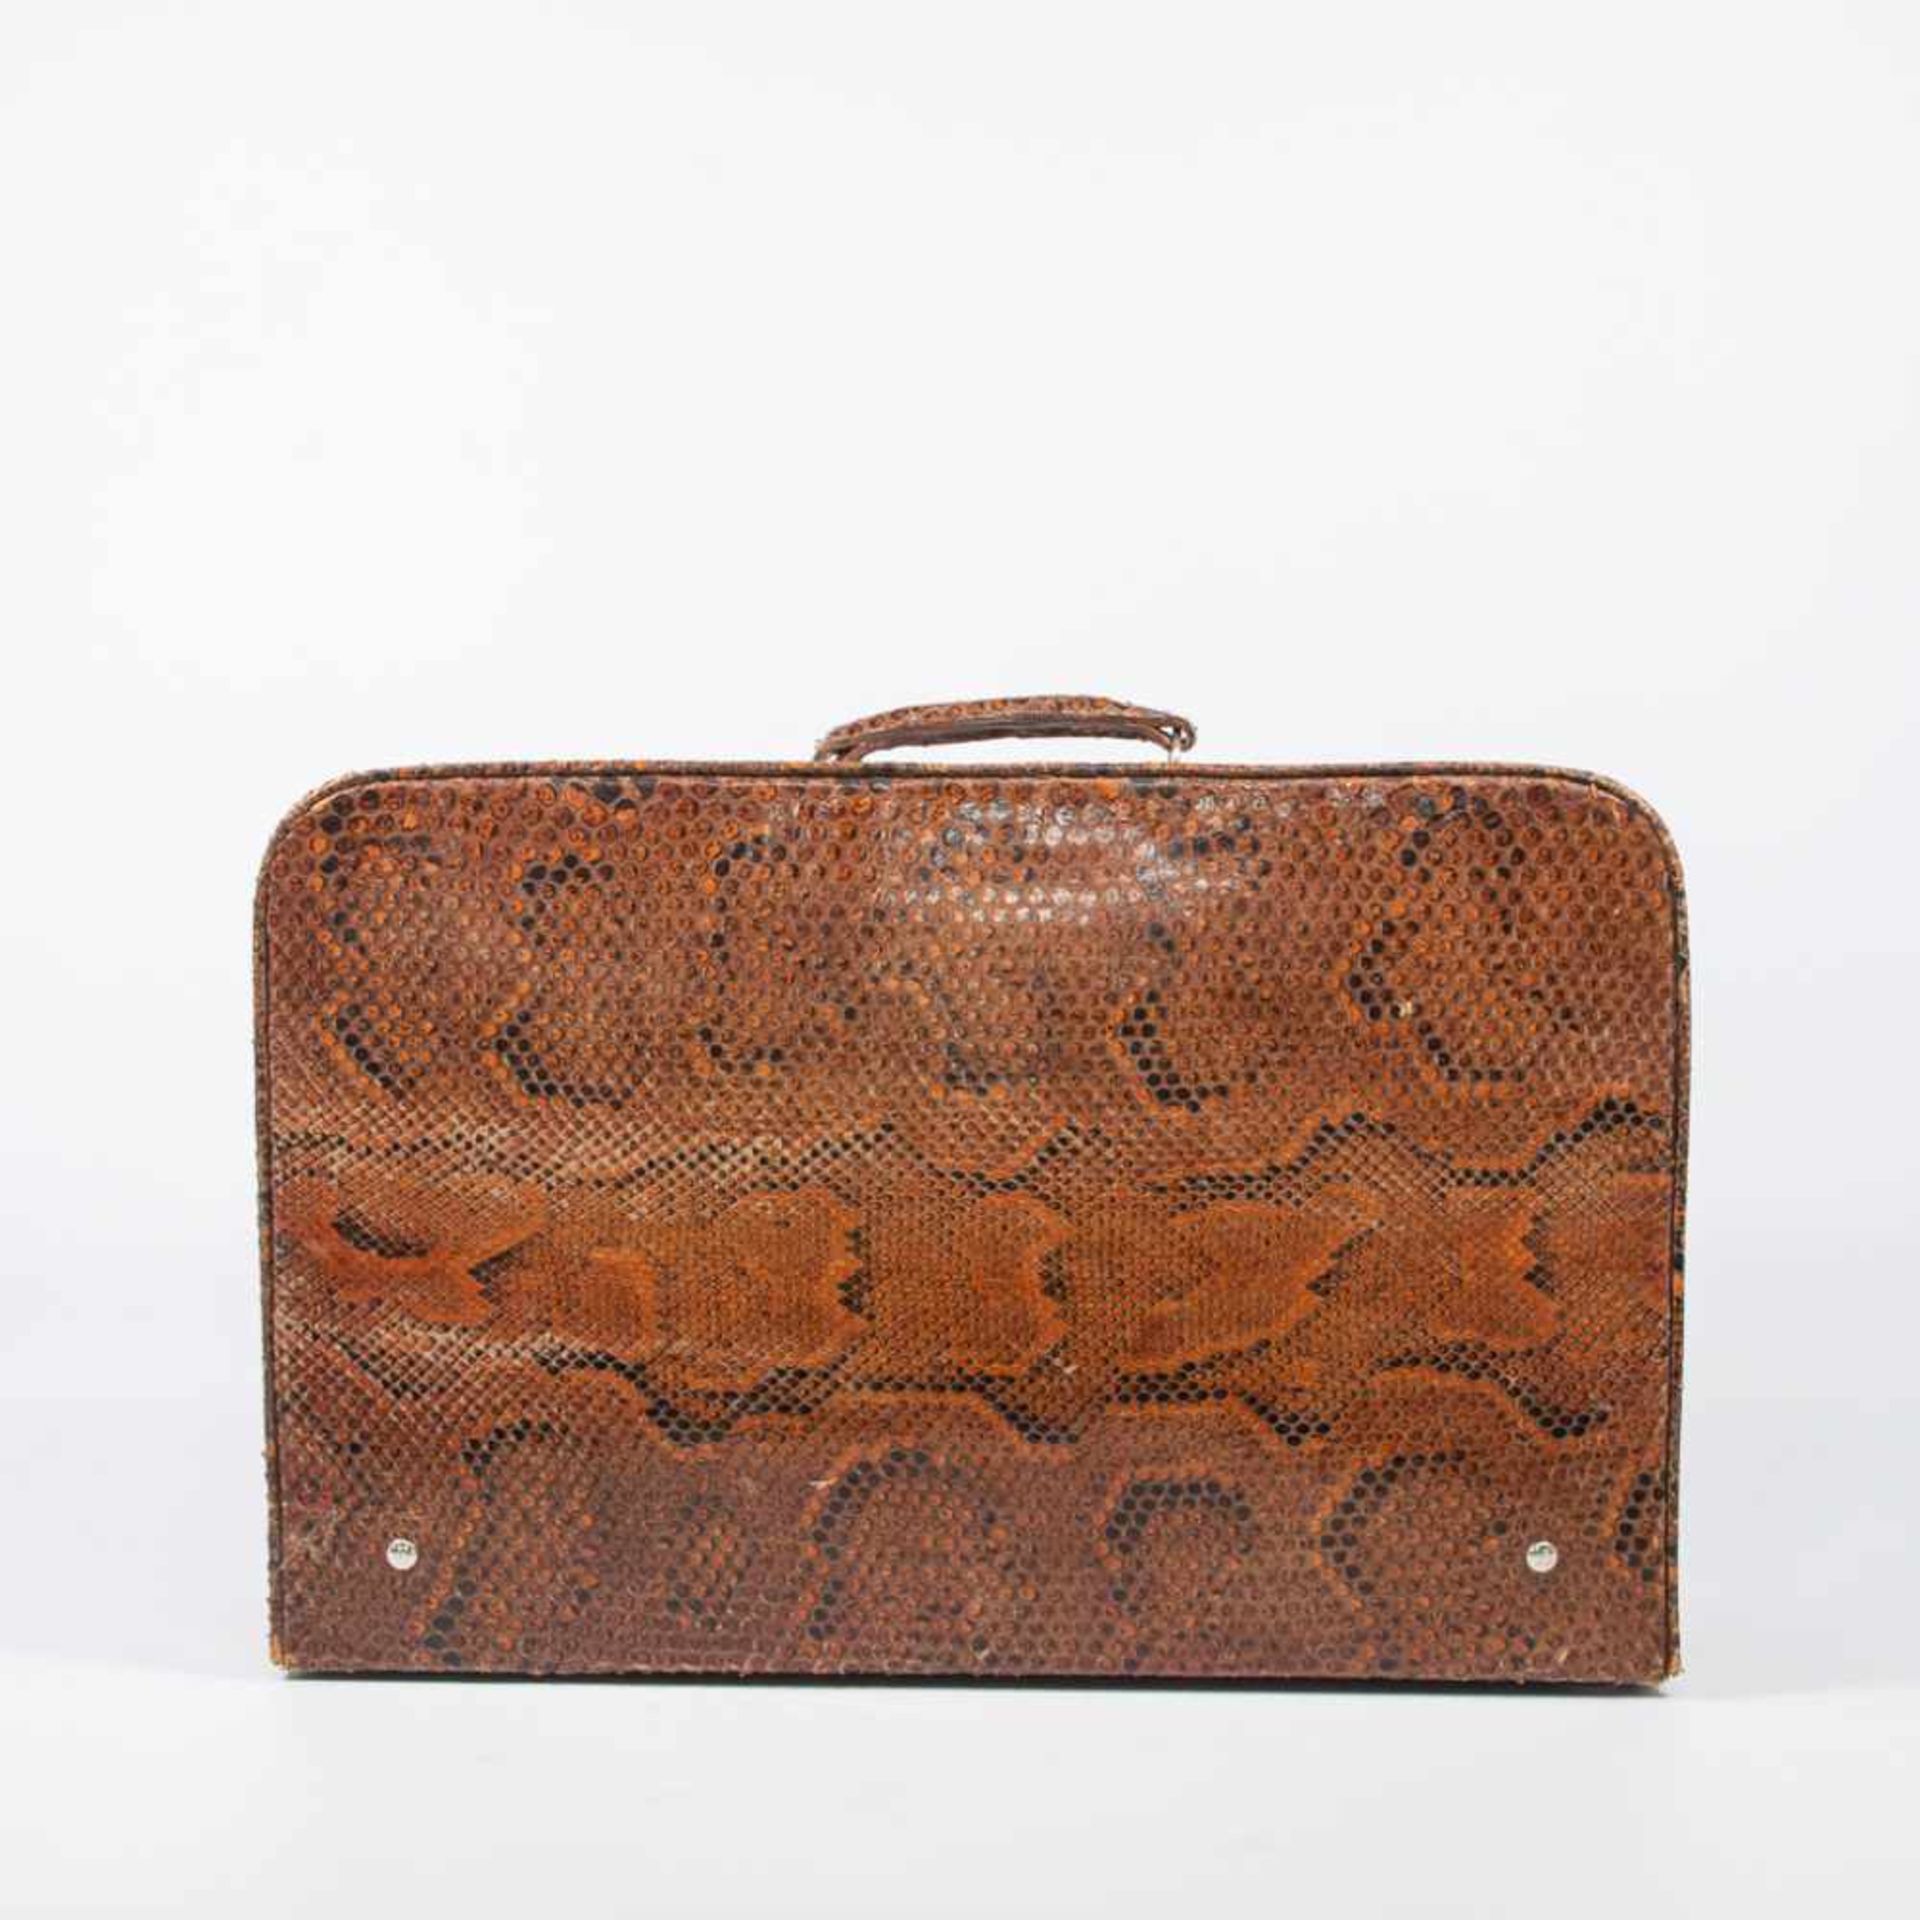 Suitcase in snake leather - Image 10 of 15